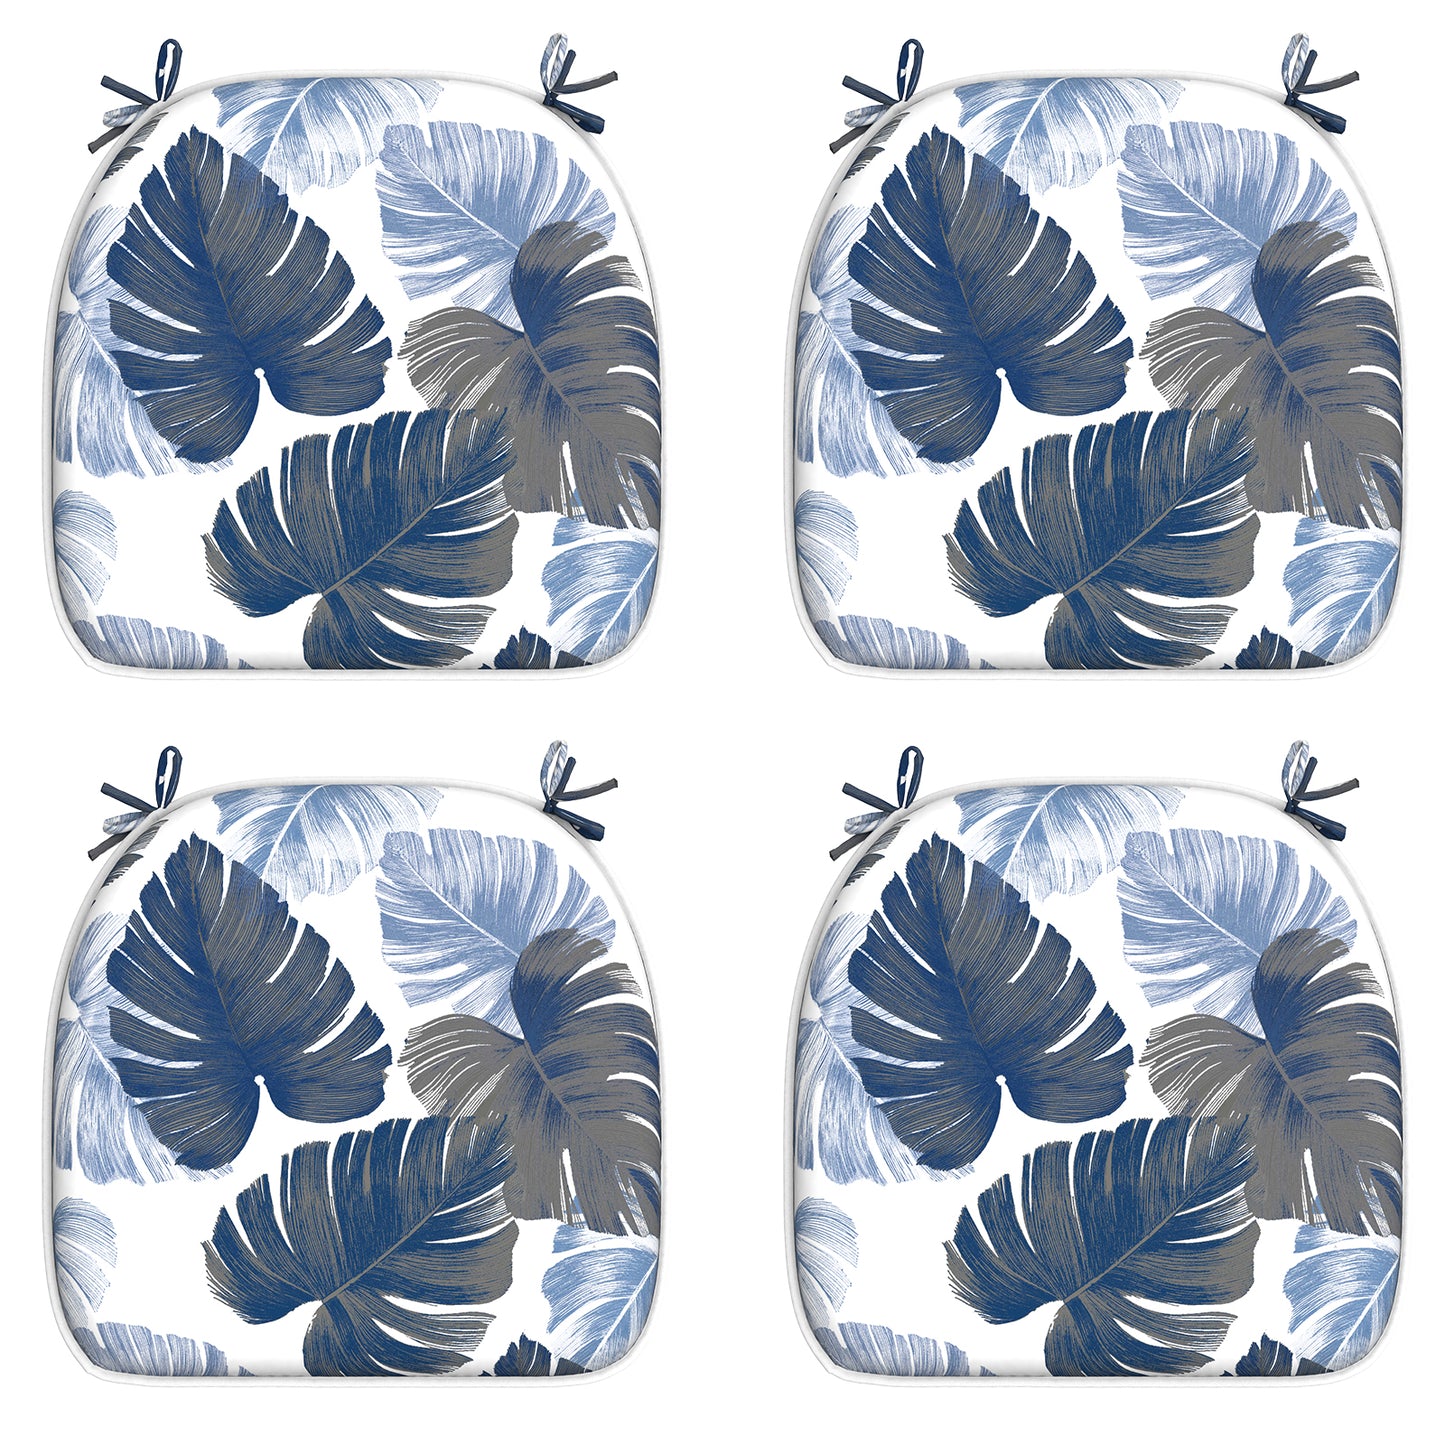 Melody Elephant Outdoor Chair Cushions Set of 4, Water Resistant Patio Chair Pads with Ties, Seat Cushions for Home Garden Furniture Decoration, 16”x17”,  Monstera Blue